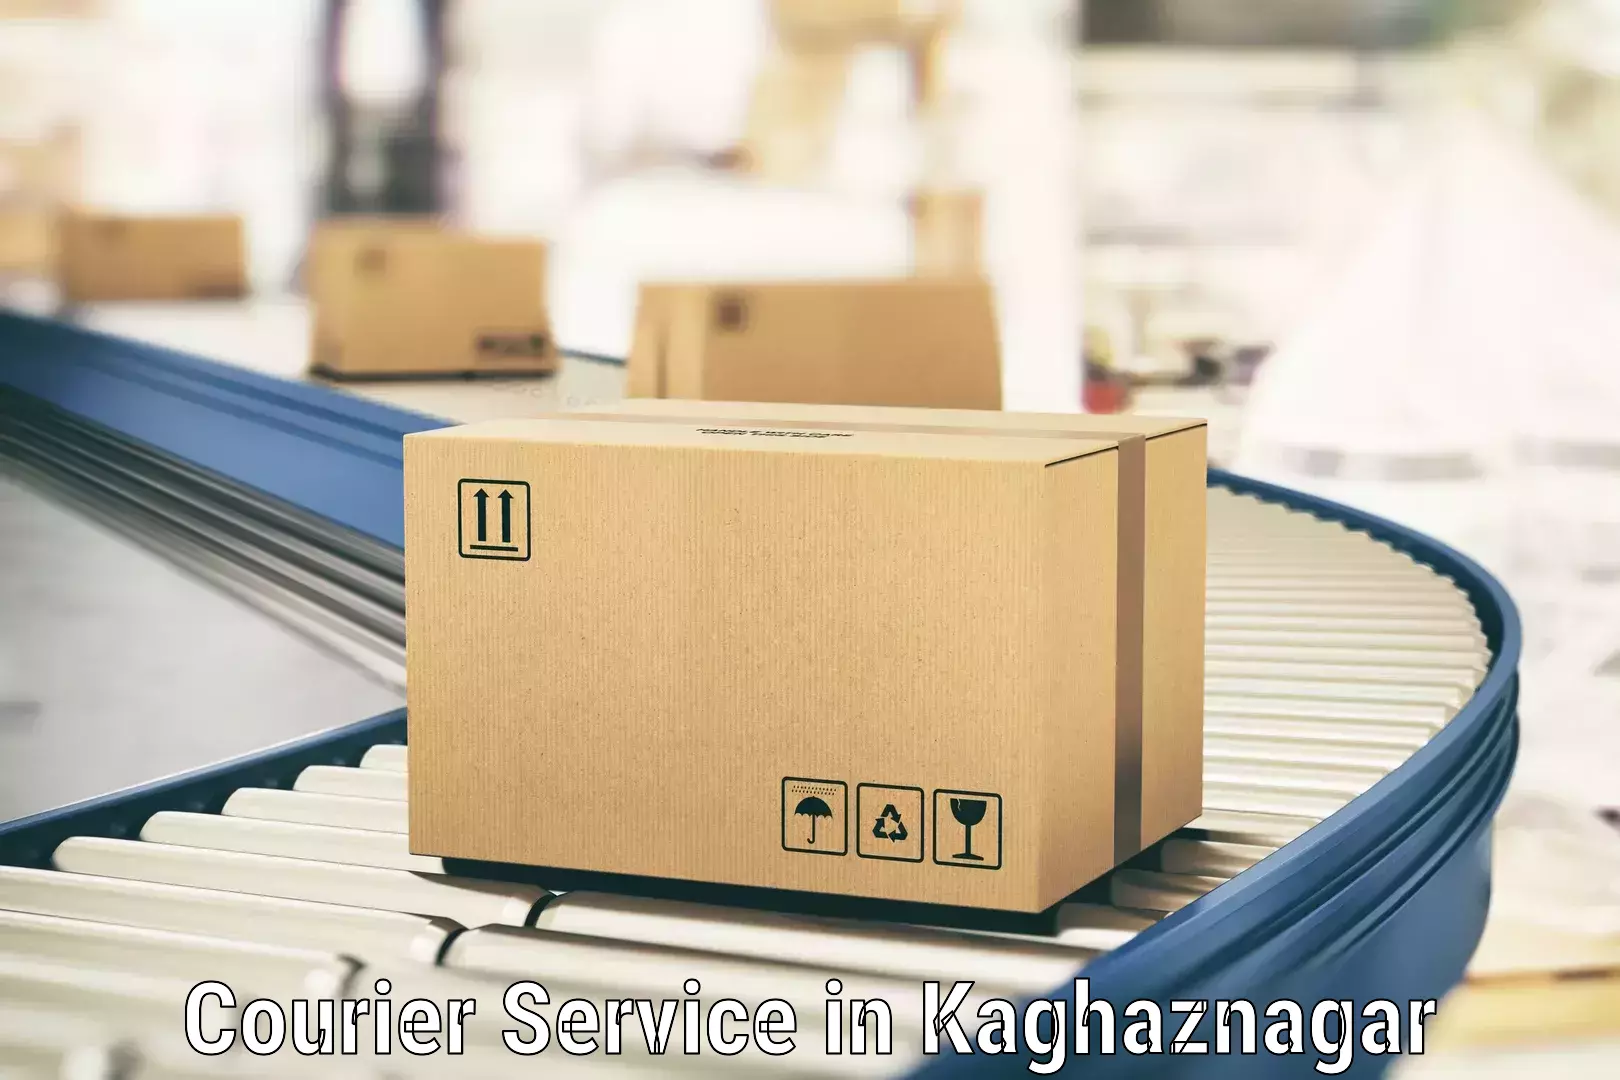 Secure package delivery in Kaghaznagar